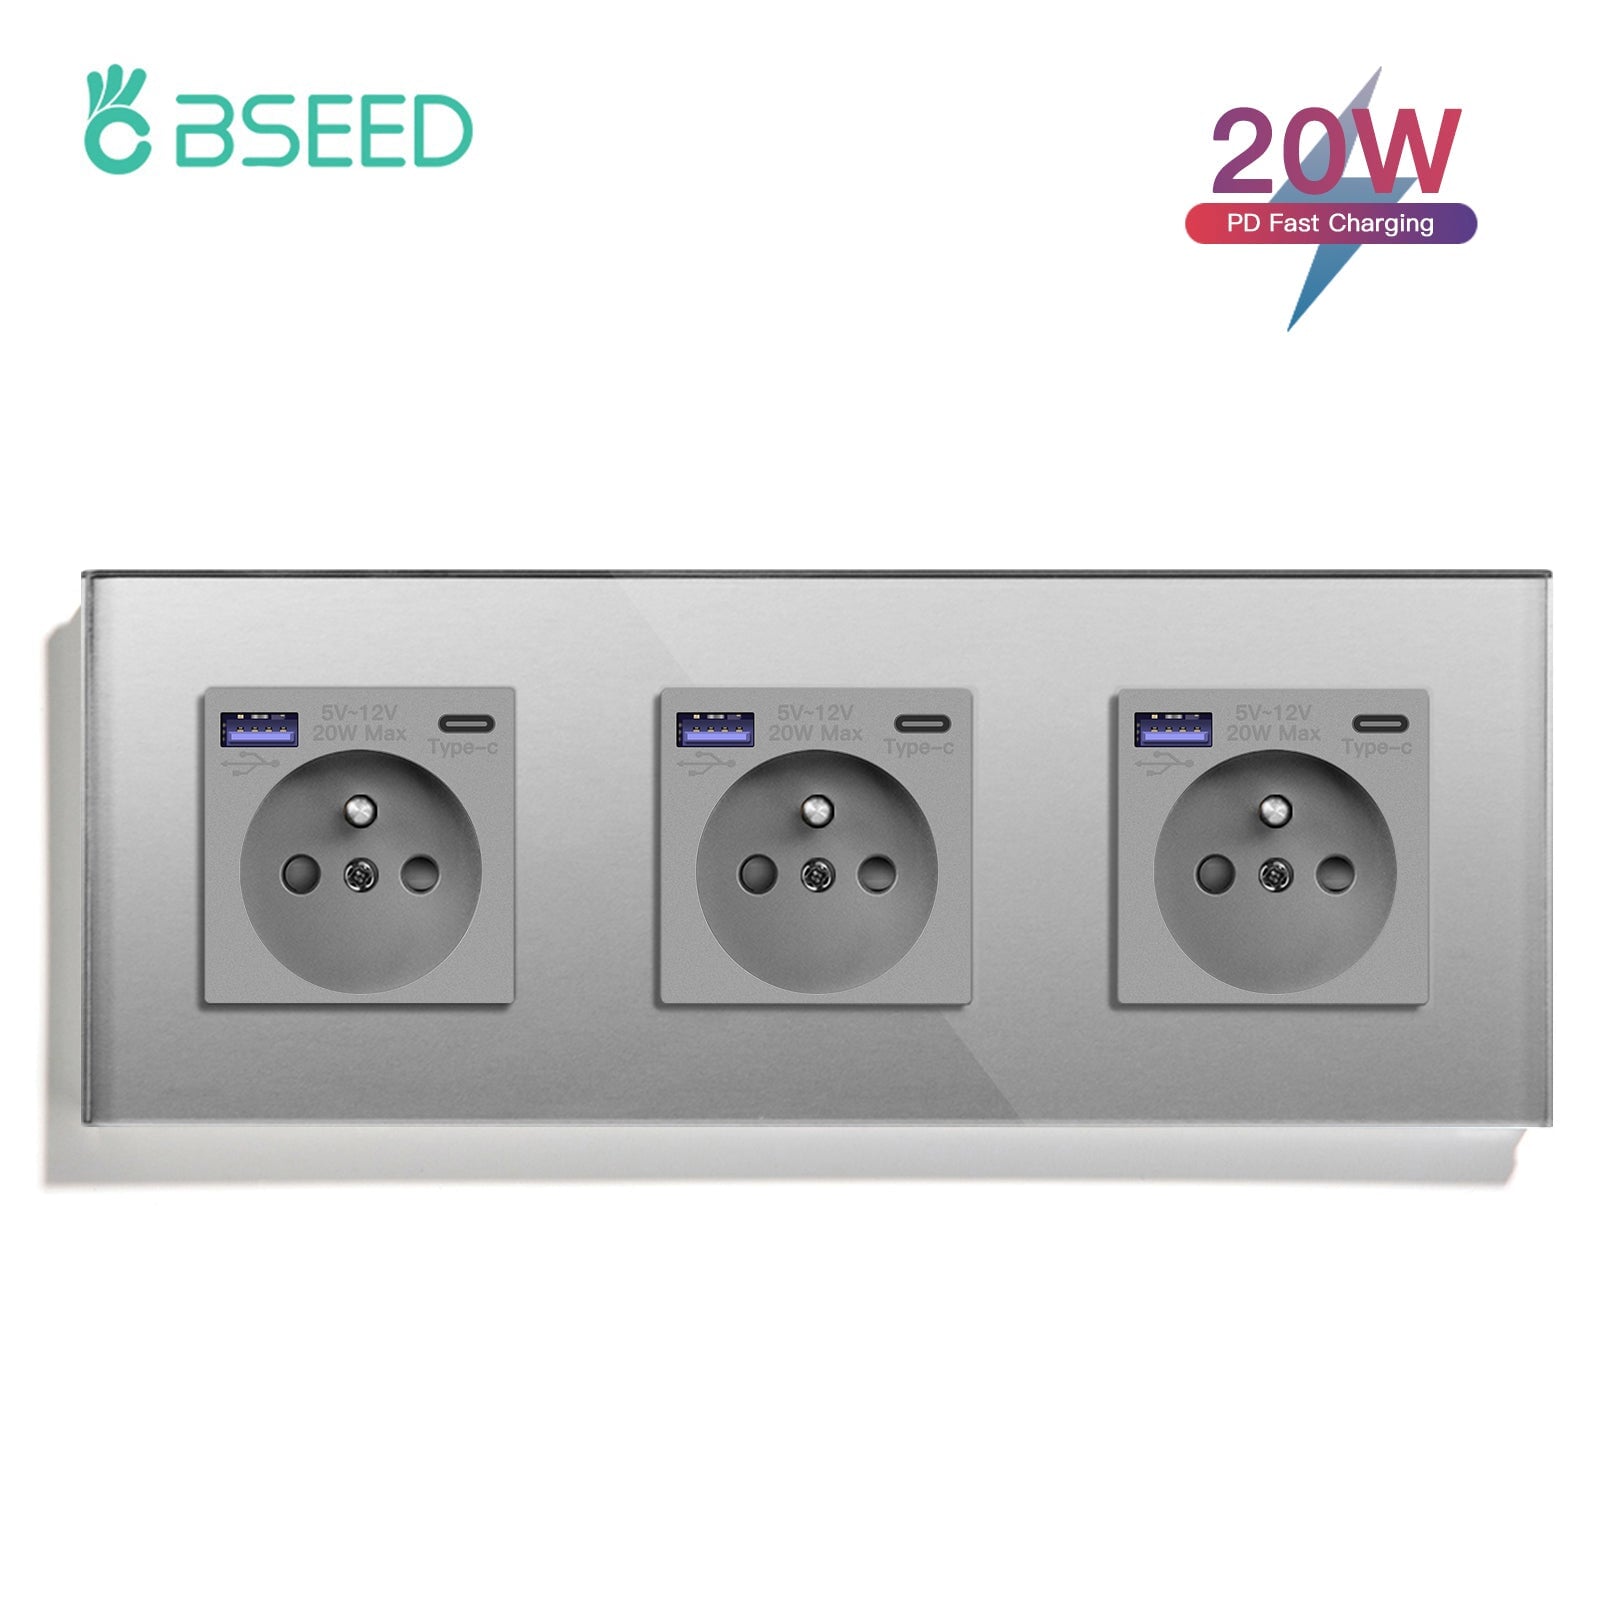 BSEED FR sockets with 20W PD Fast Charge Type-C Interface Outlet Wall Socket Power Outlets & Sockets Bseedswitch Grey Triple 